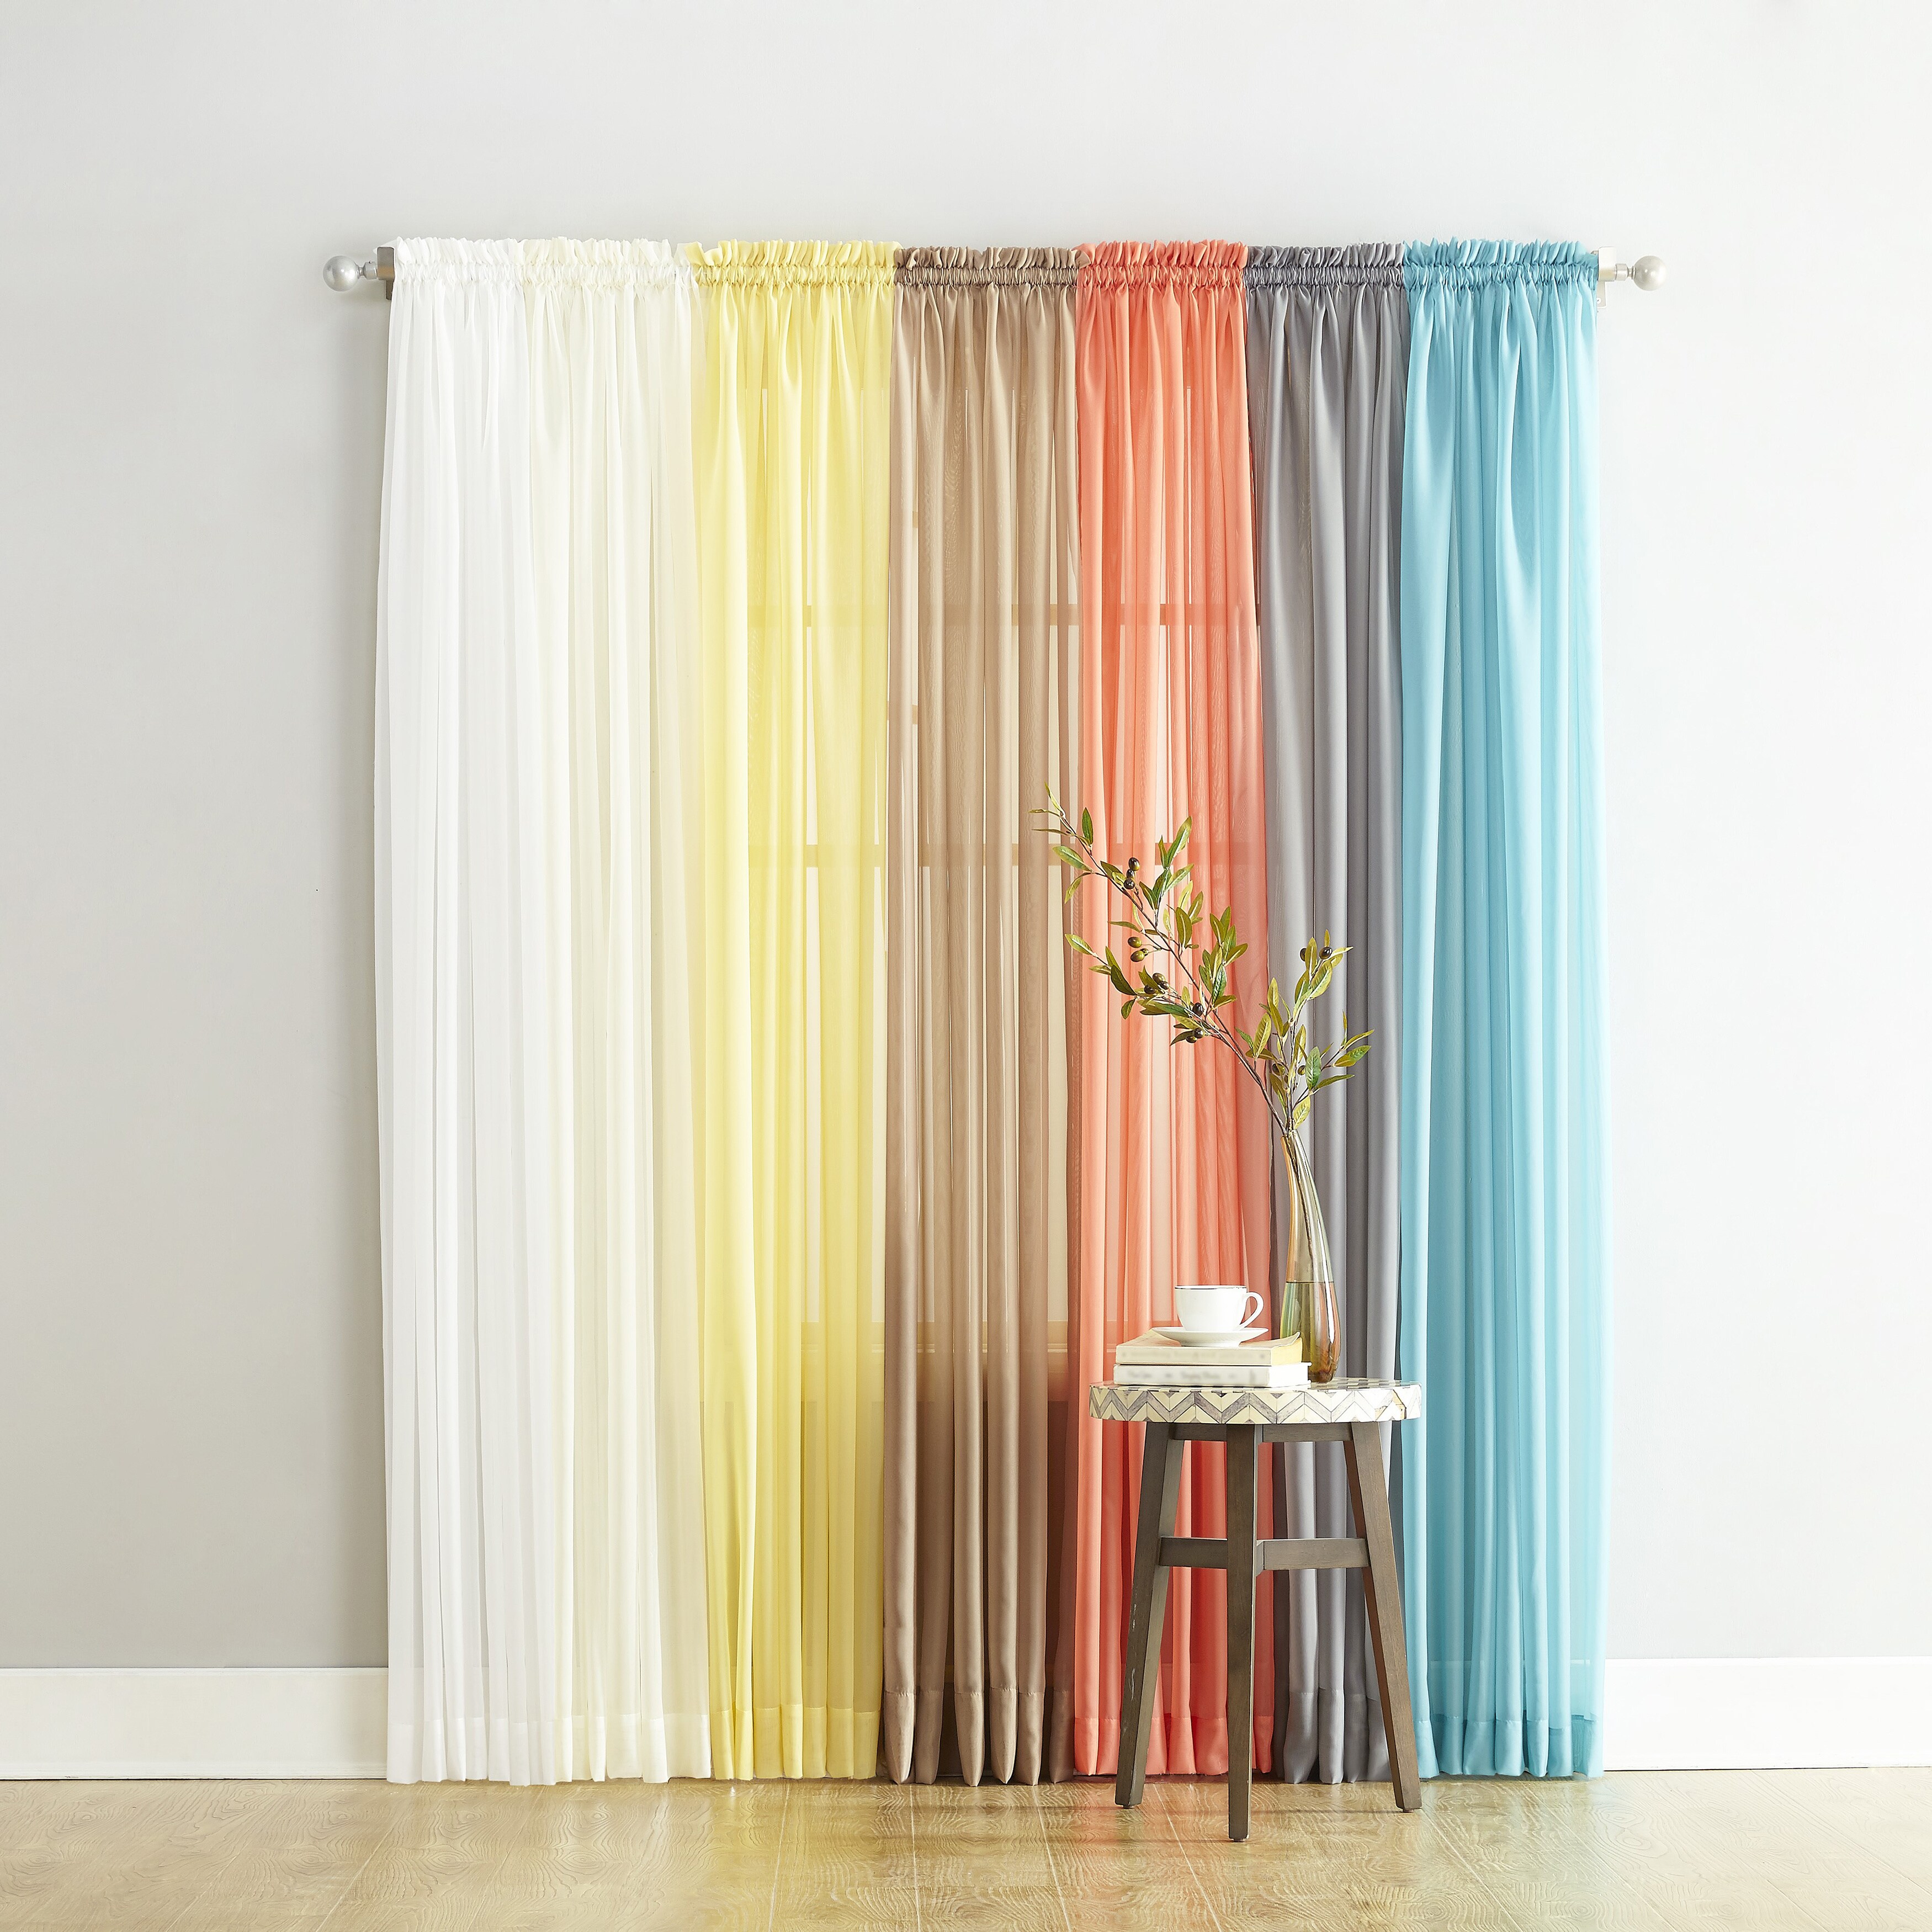 Buy Sheer Curtains Online At Overstock Our Best Window Treatments